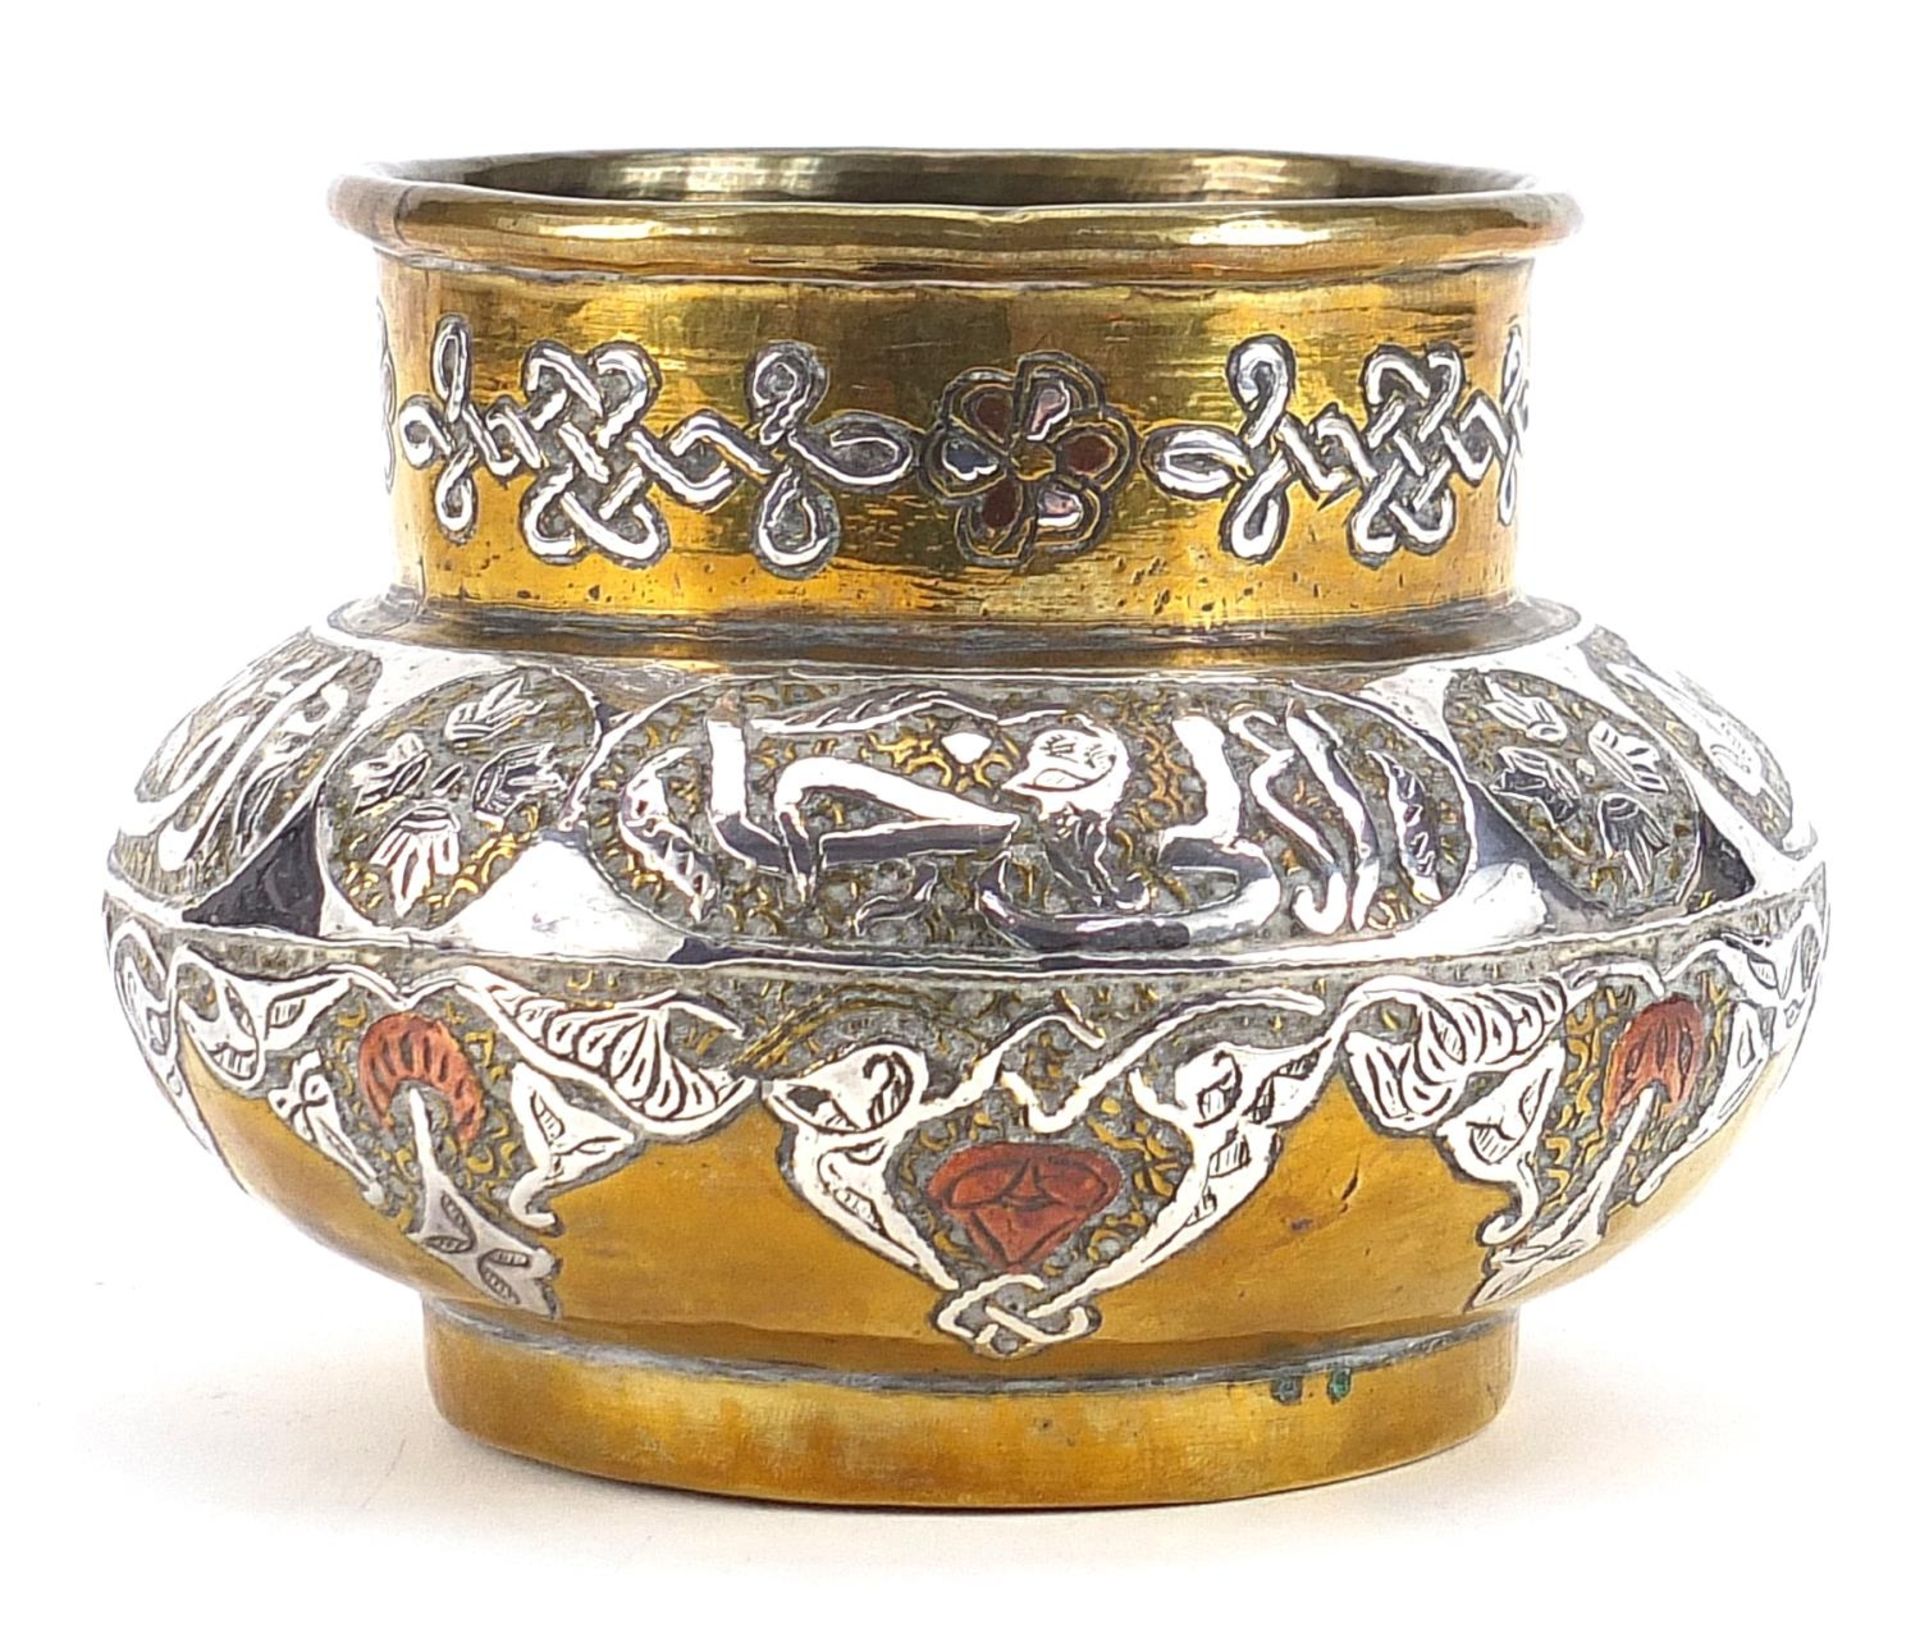 Islamic Cairoware brass vase with silver and copper overlay, 8.5cm high - Image 2 of 3